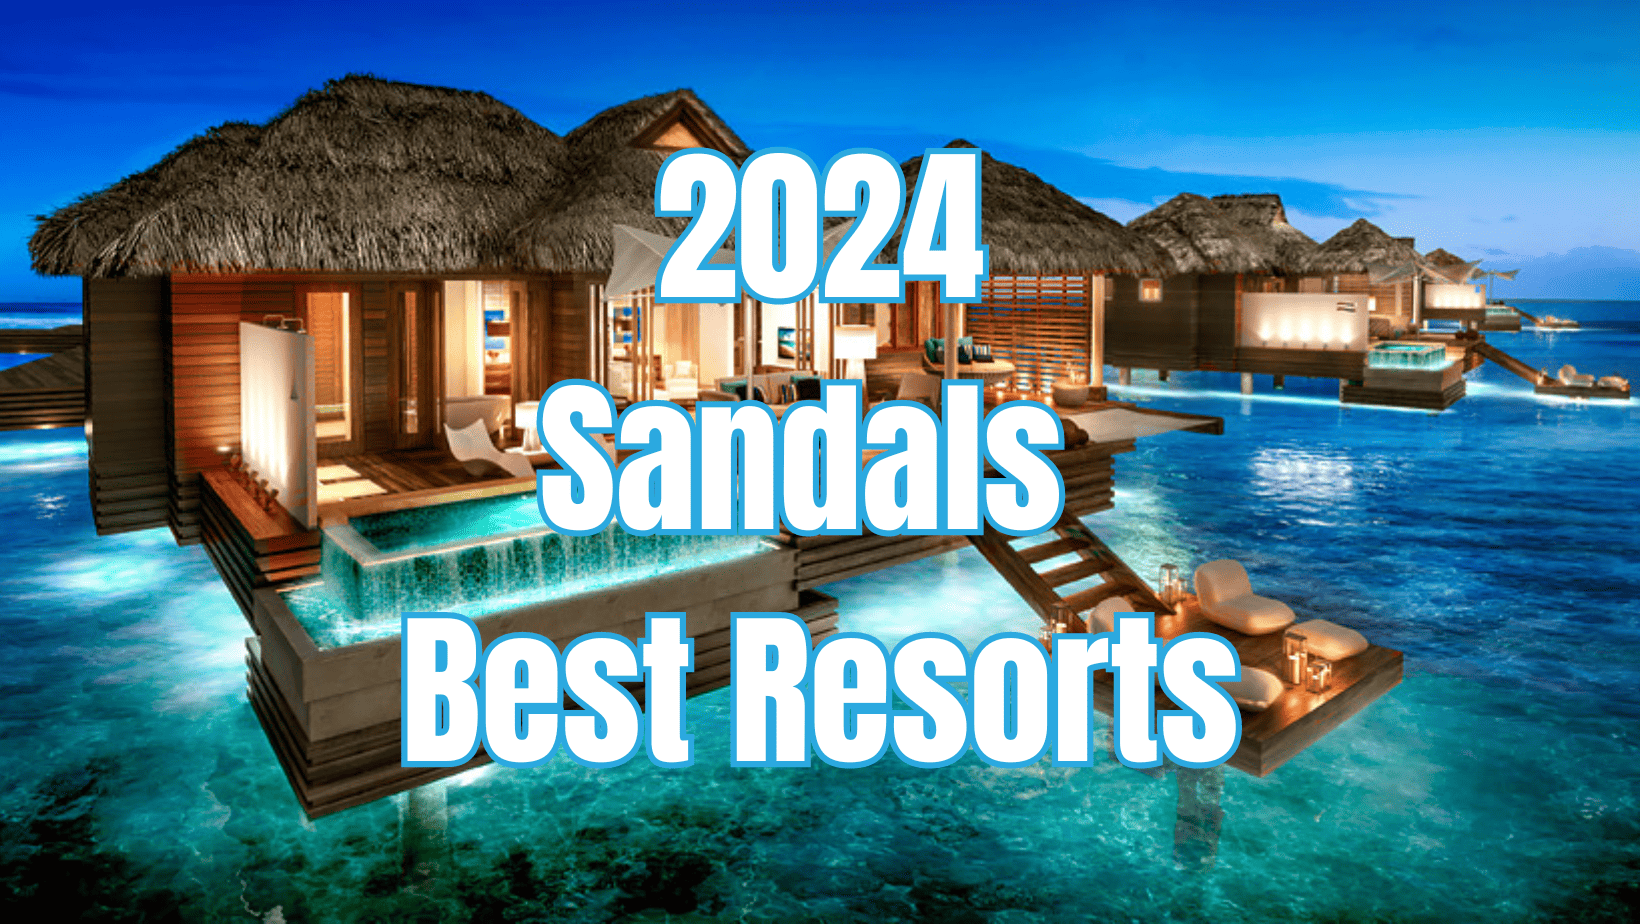 The Top 10 Most Romantic All Inclusive Resorts in the World